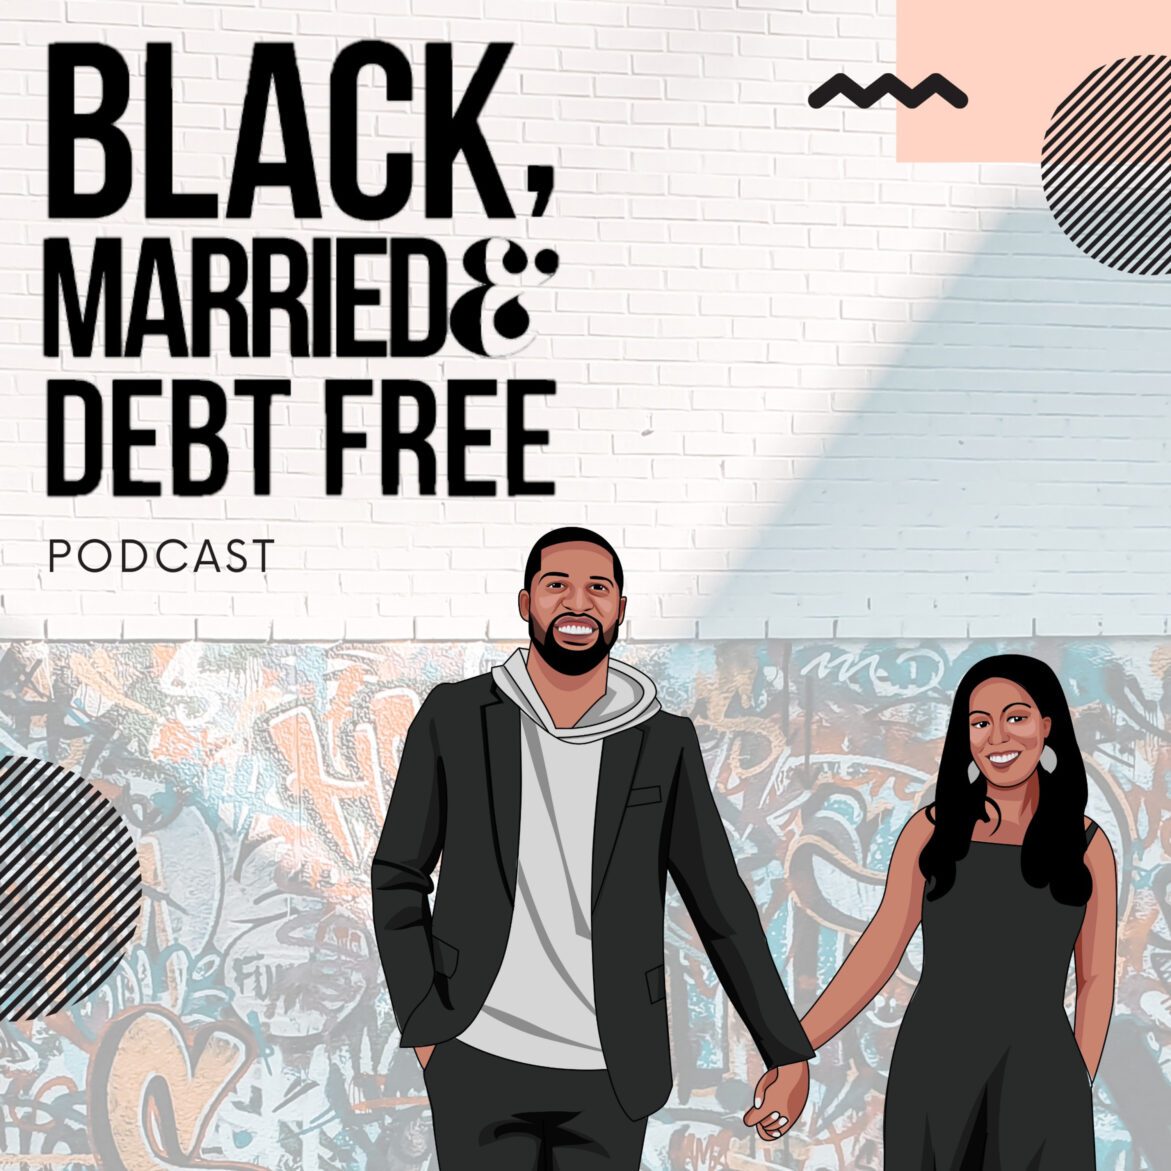 Black Podcasting - (EP - 175 NO MUSIC) OUR THOUGHTS ON THE JOBS REPORT | ASK A CFP w/ DOMINIQUE HENDERSON TOP 100 CFP